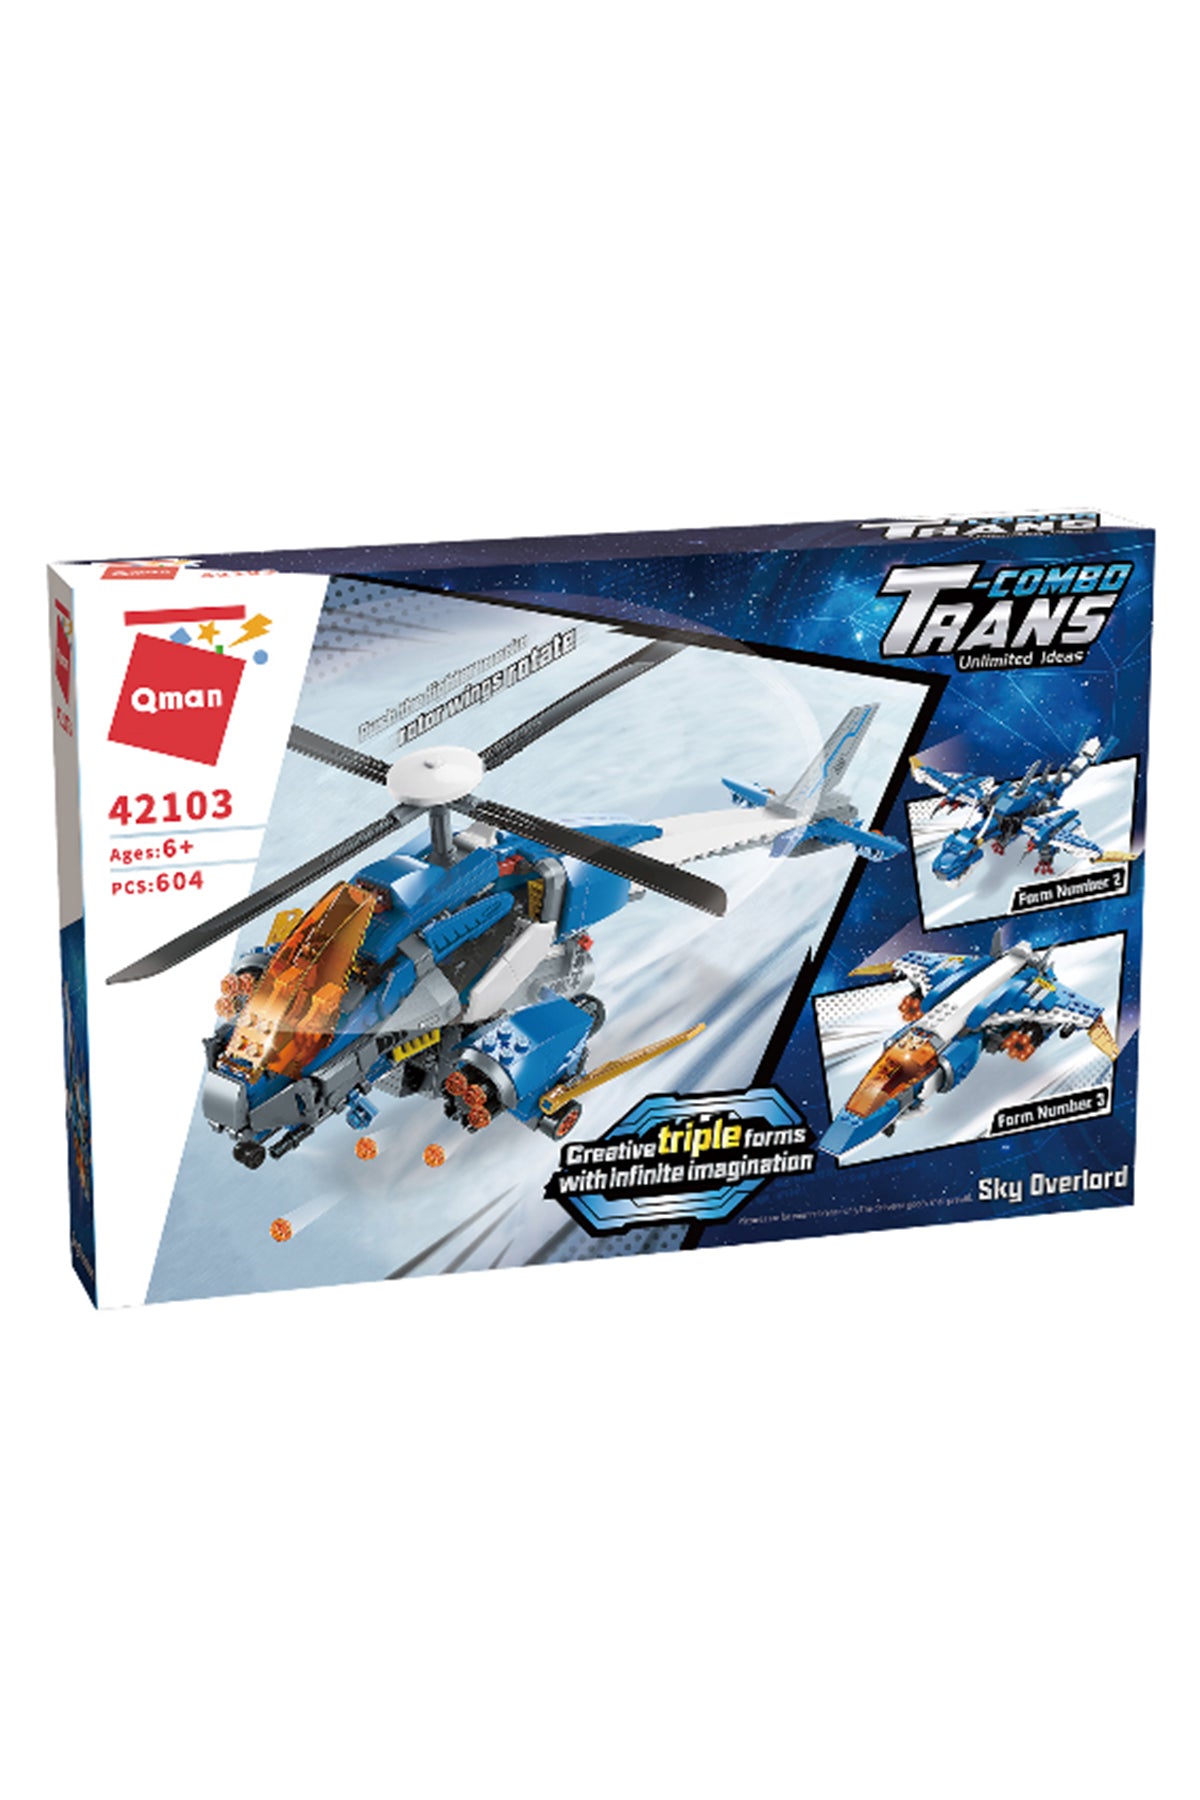 Qman Mine City Sky Overlord Assemble Toy Set